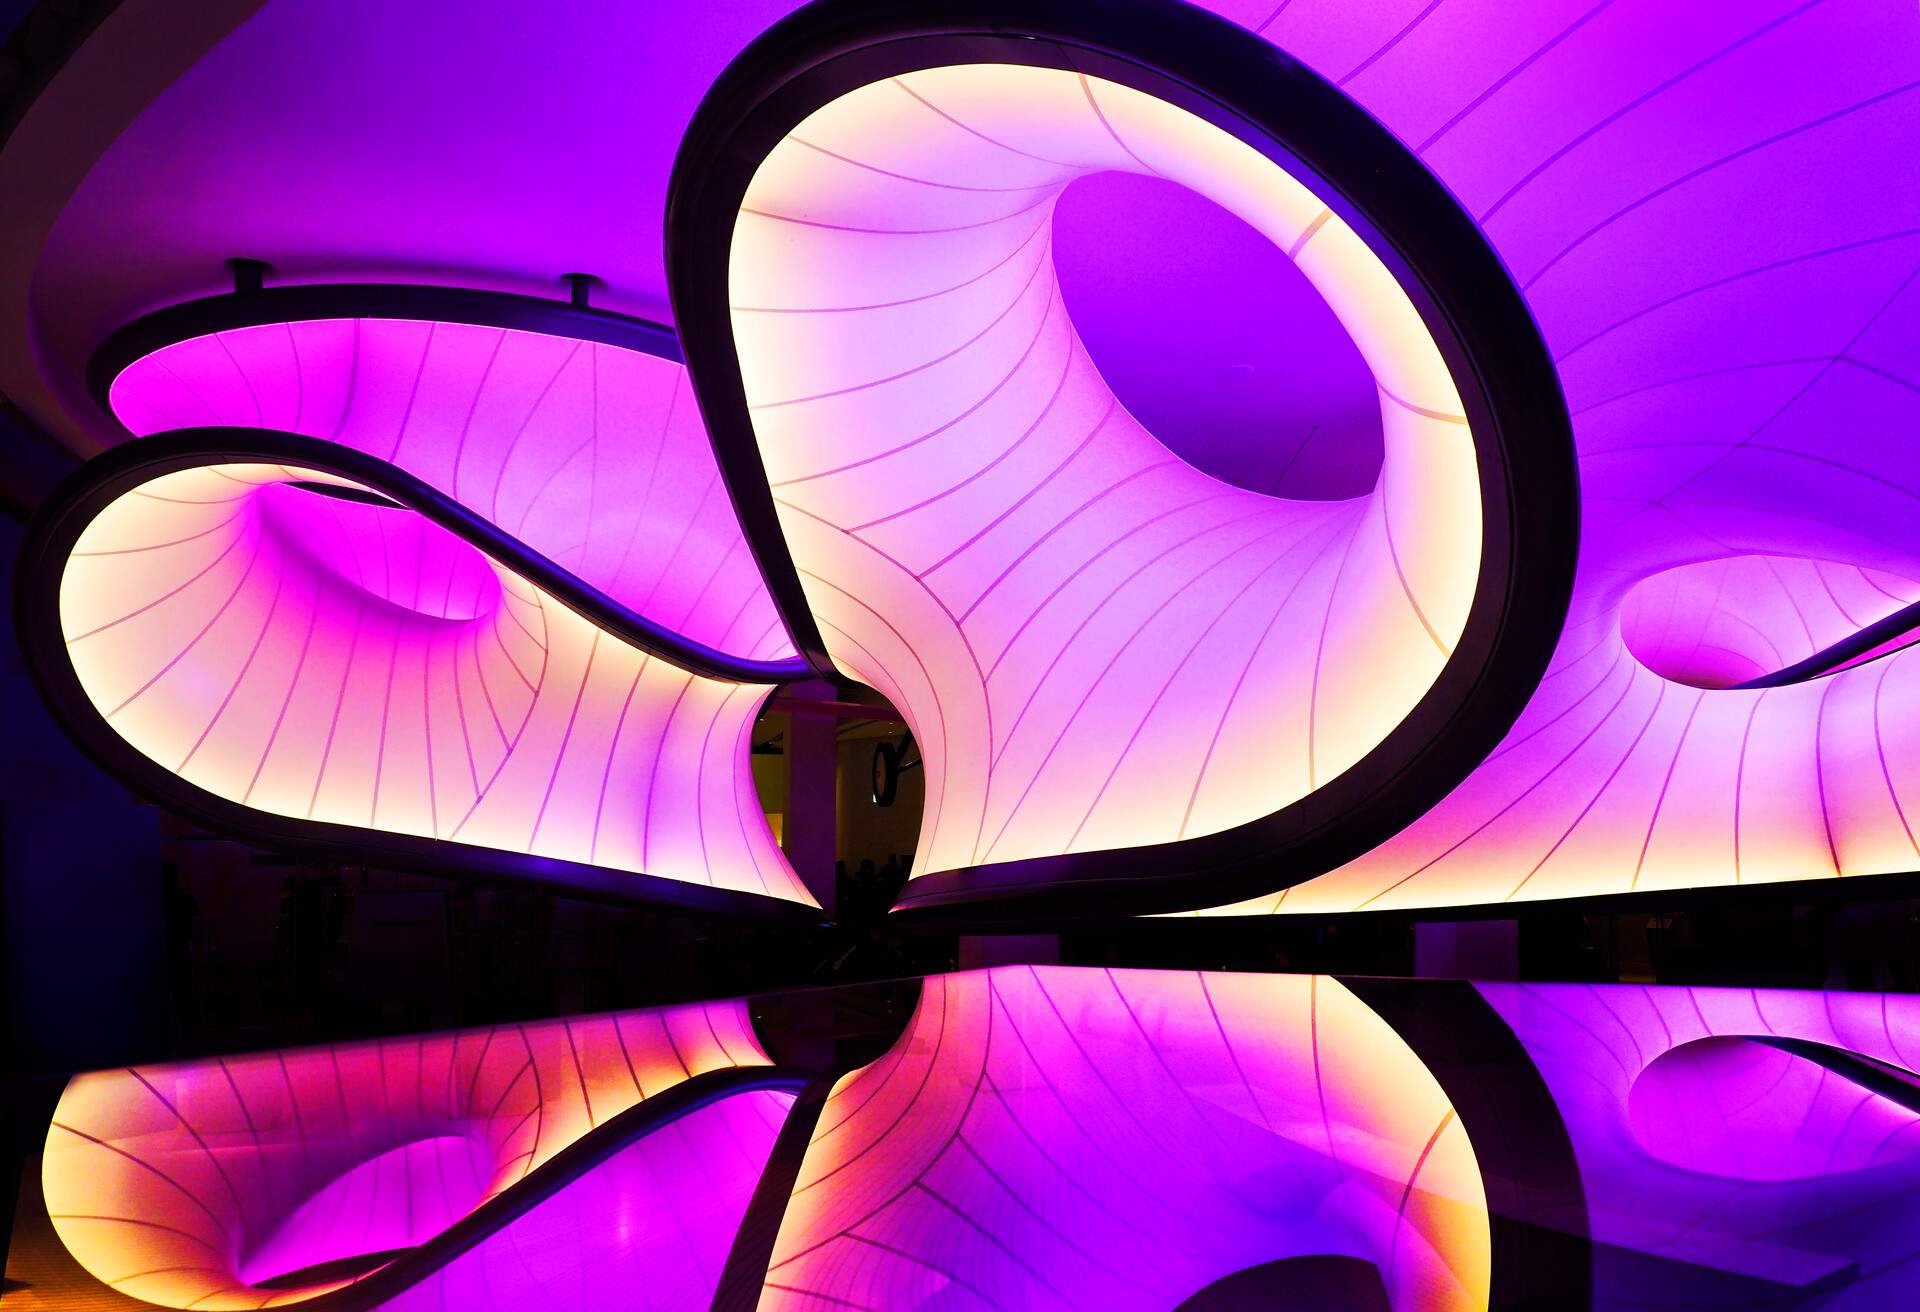 Smooth, curvy, lined layouts with vibrant shades of purple light on display in a science museum.